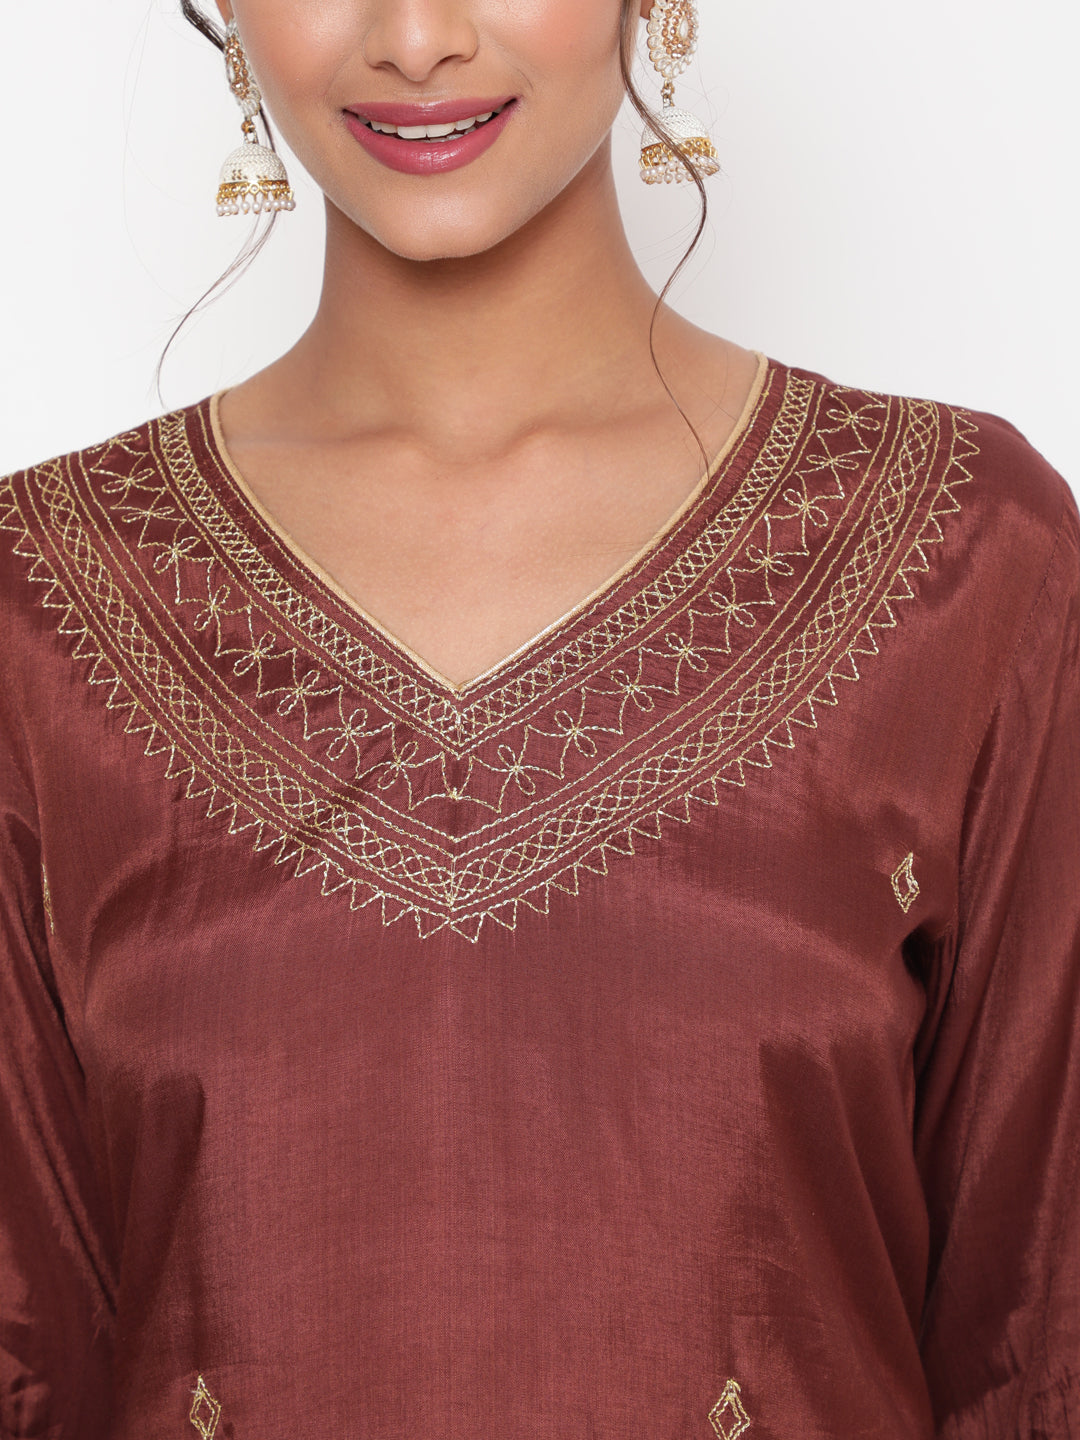 Woman posing in Brown Embroidered Straight Kurta Pant Set